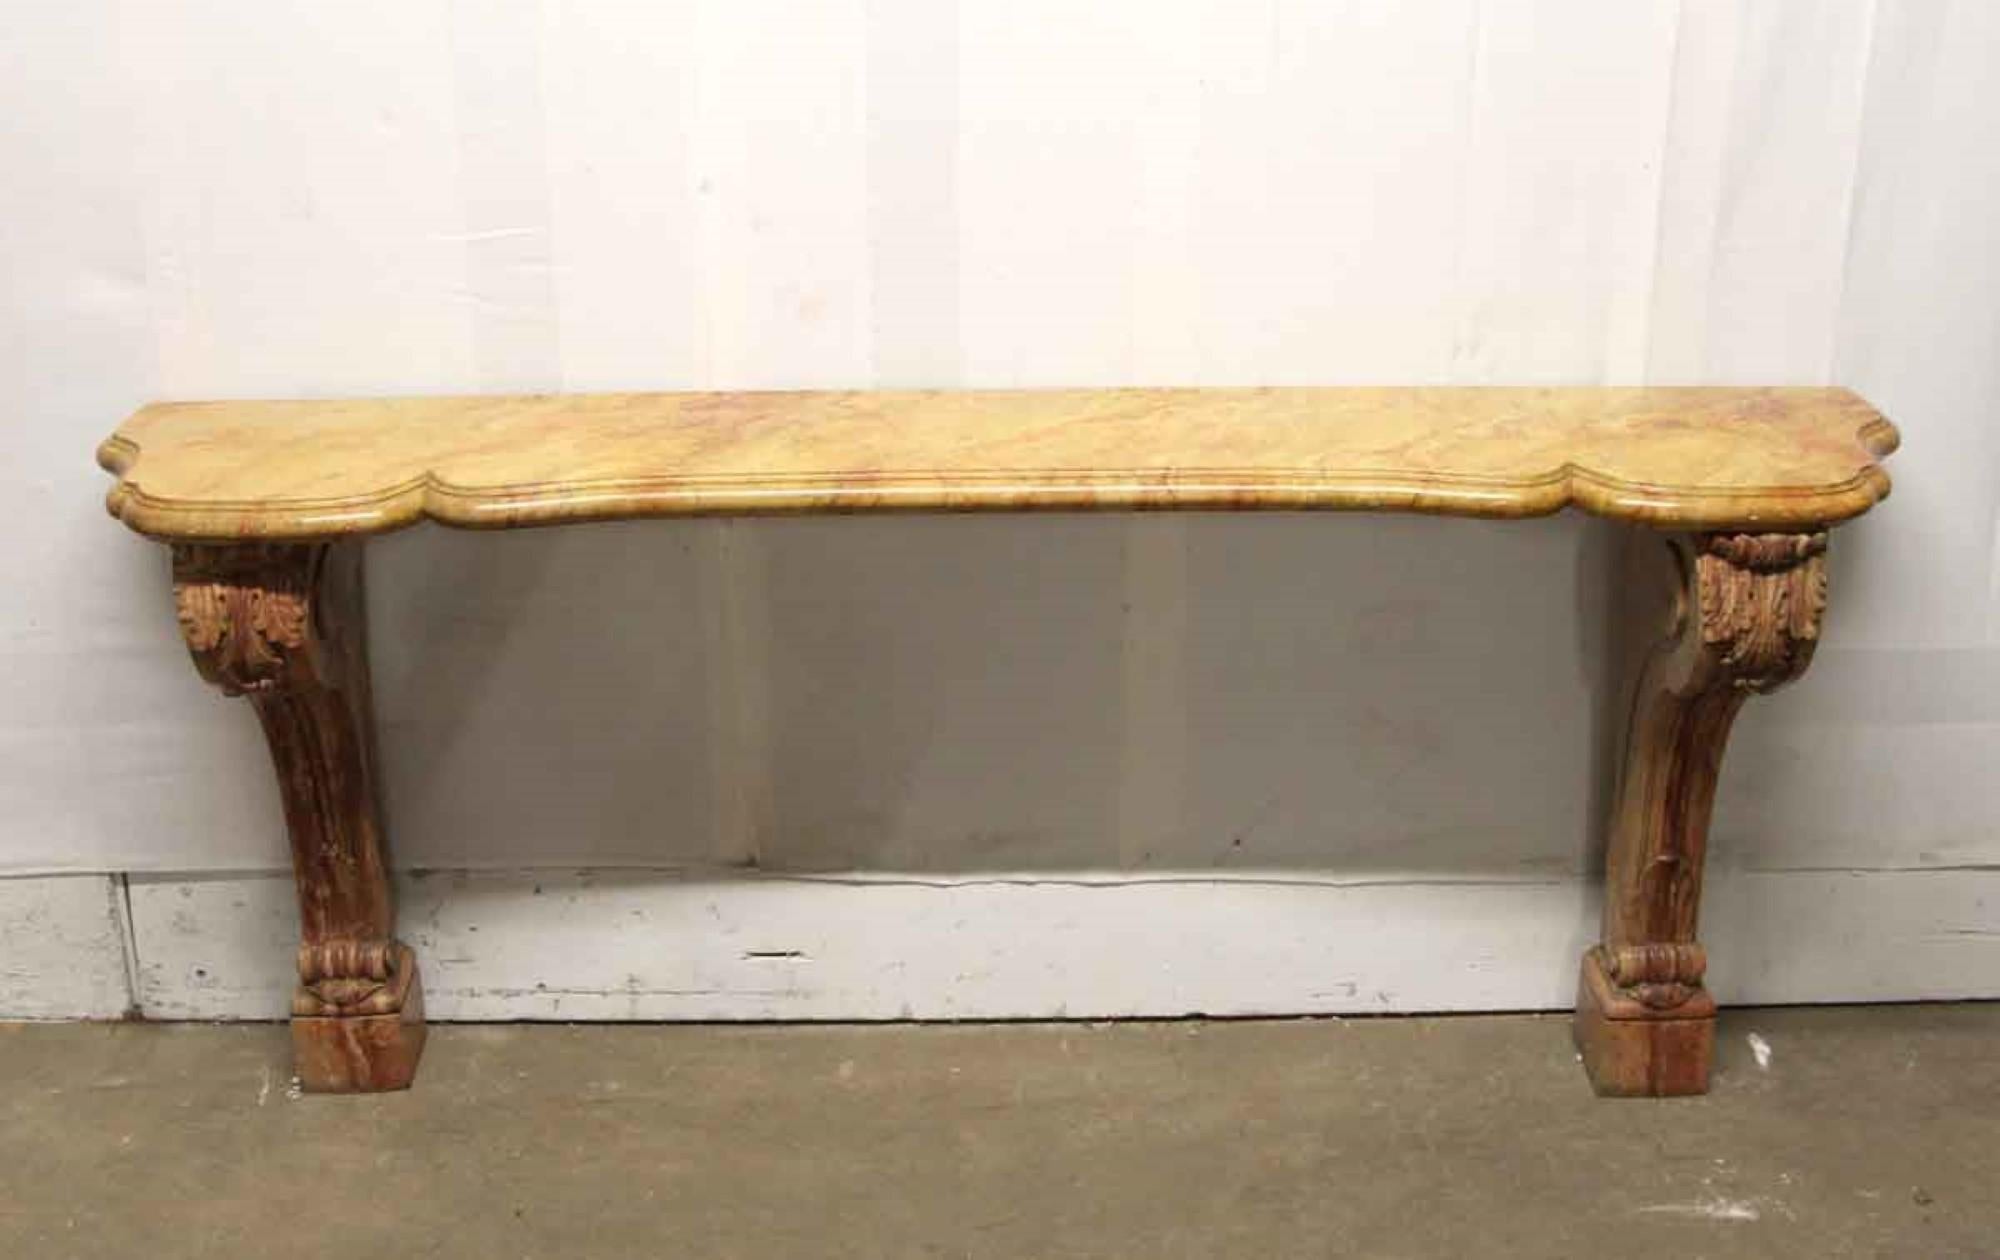 1990s carved marble entry side table or console with corbel sides and decorative details and a faux marble serpentine top. This can be seen at our 400 Gilligan St location in Scranton, PA.